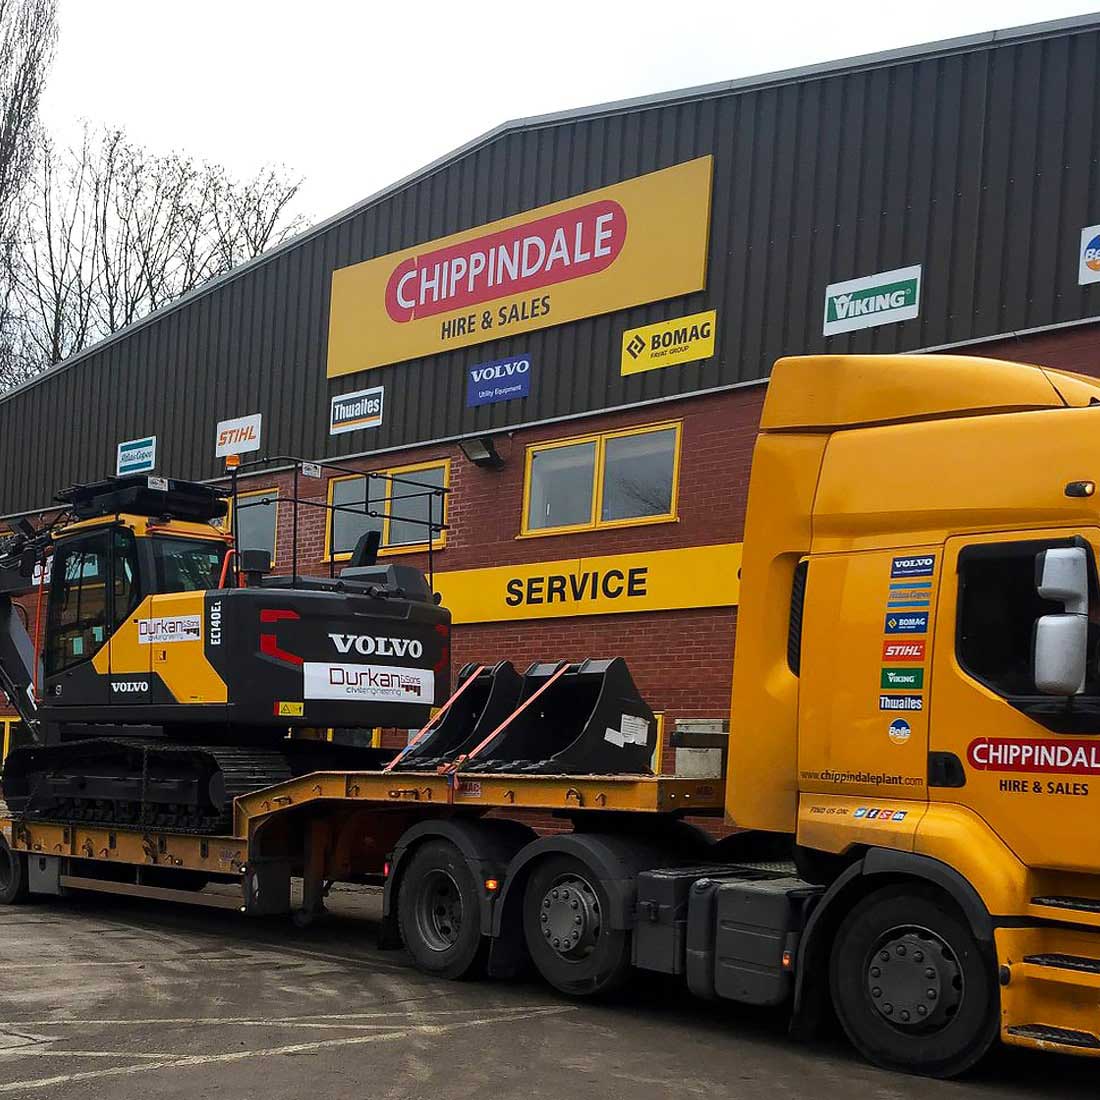 Front store view and truck of Chippindale Hire & Sales.